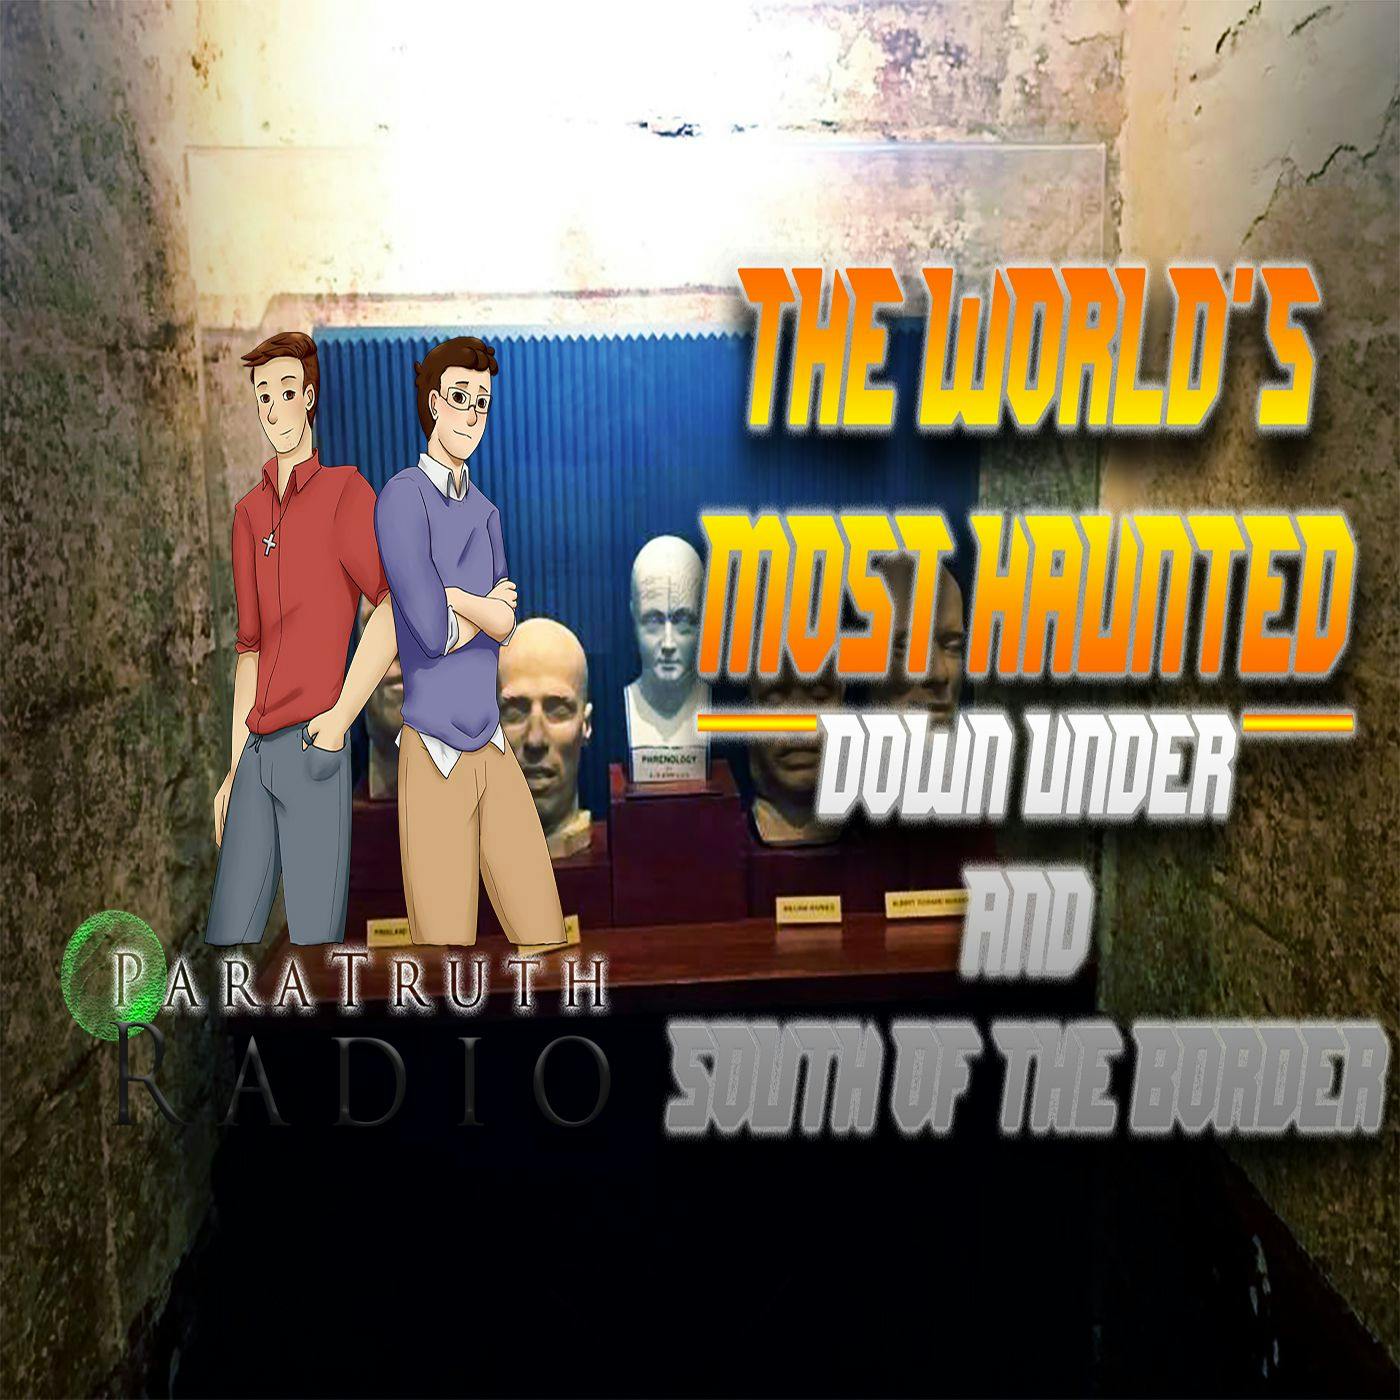 The World's Most Haunted: Down Under and South of the Border